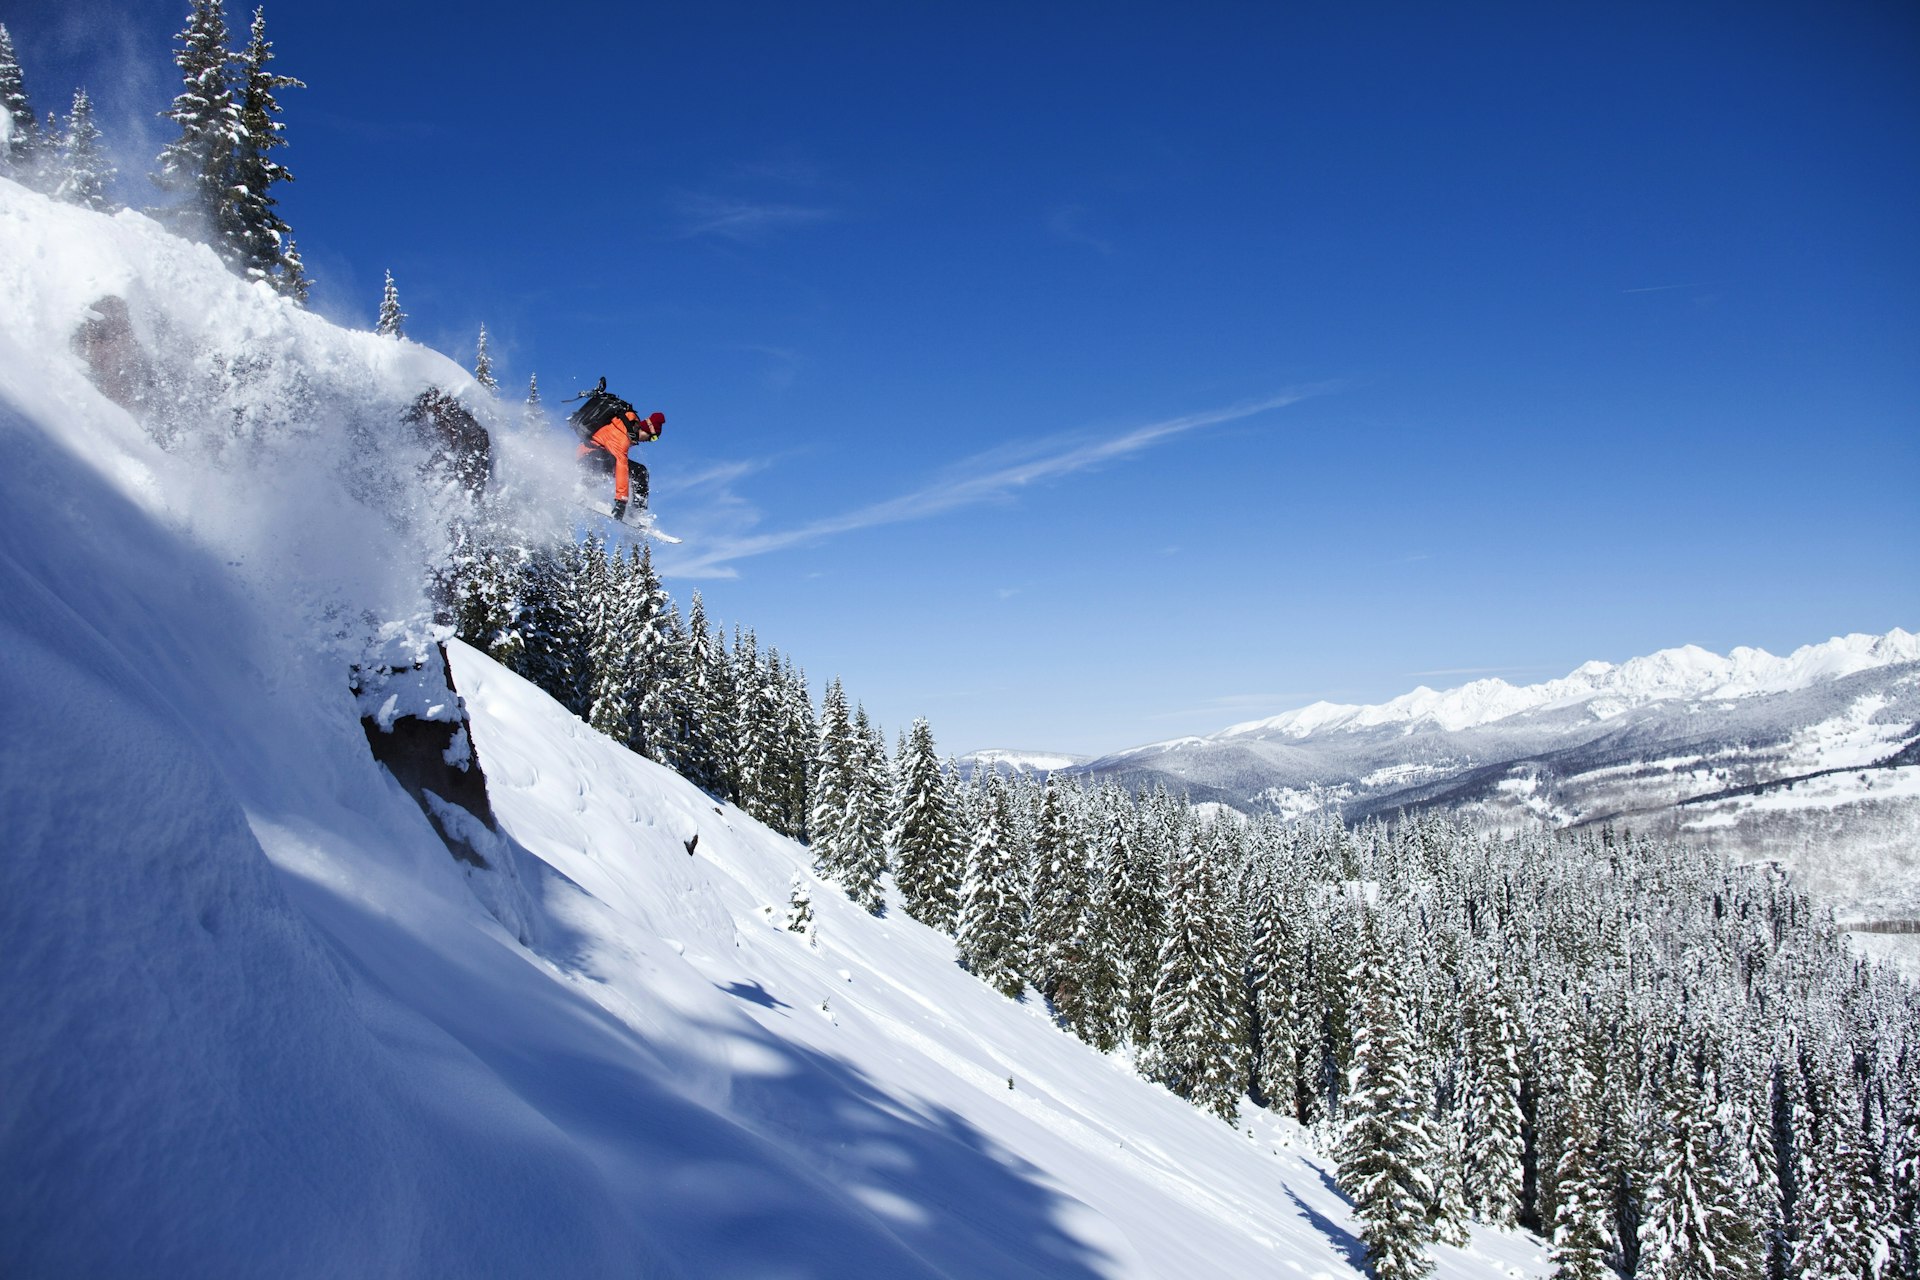 A snowboarder jumps off a cliff on a sunny powder day in Colorado